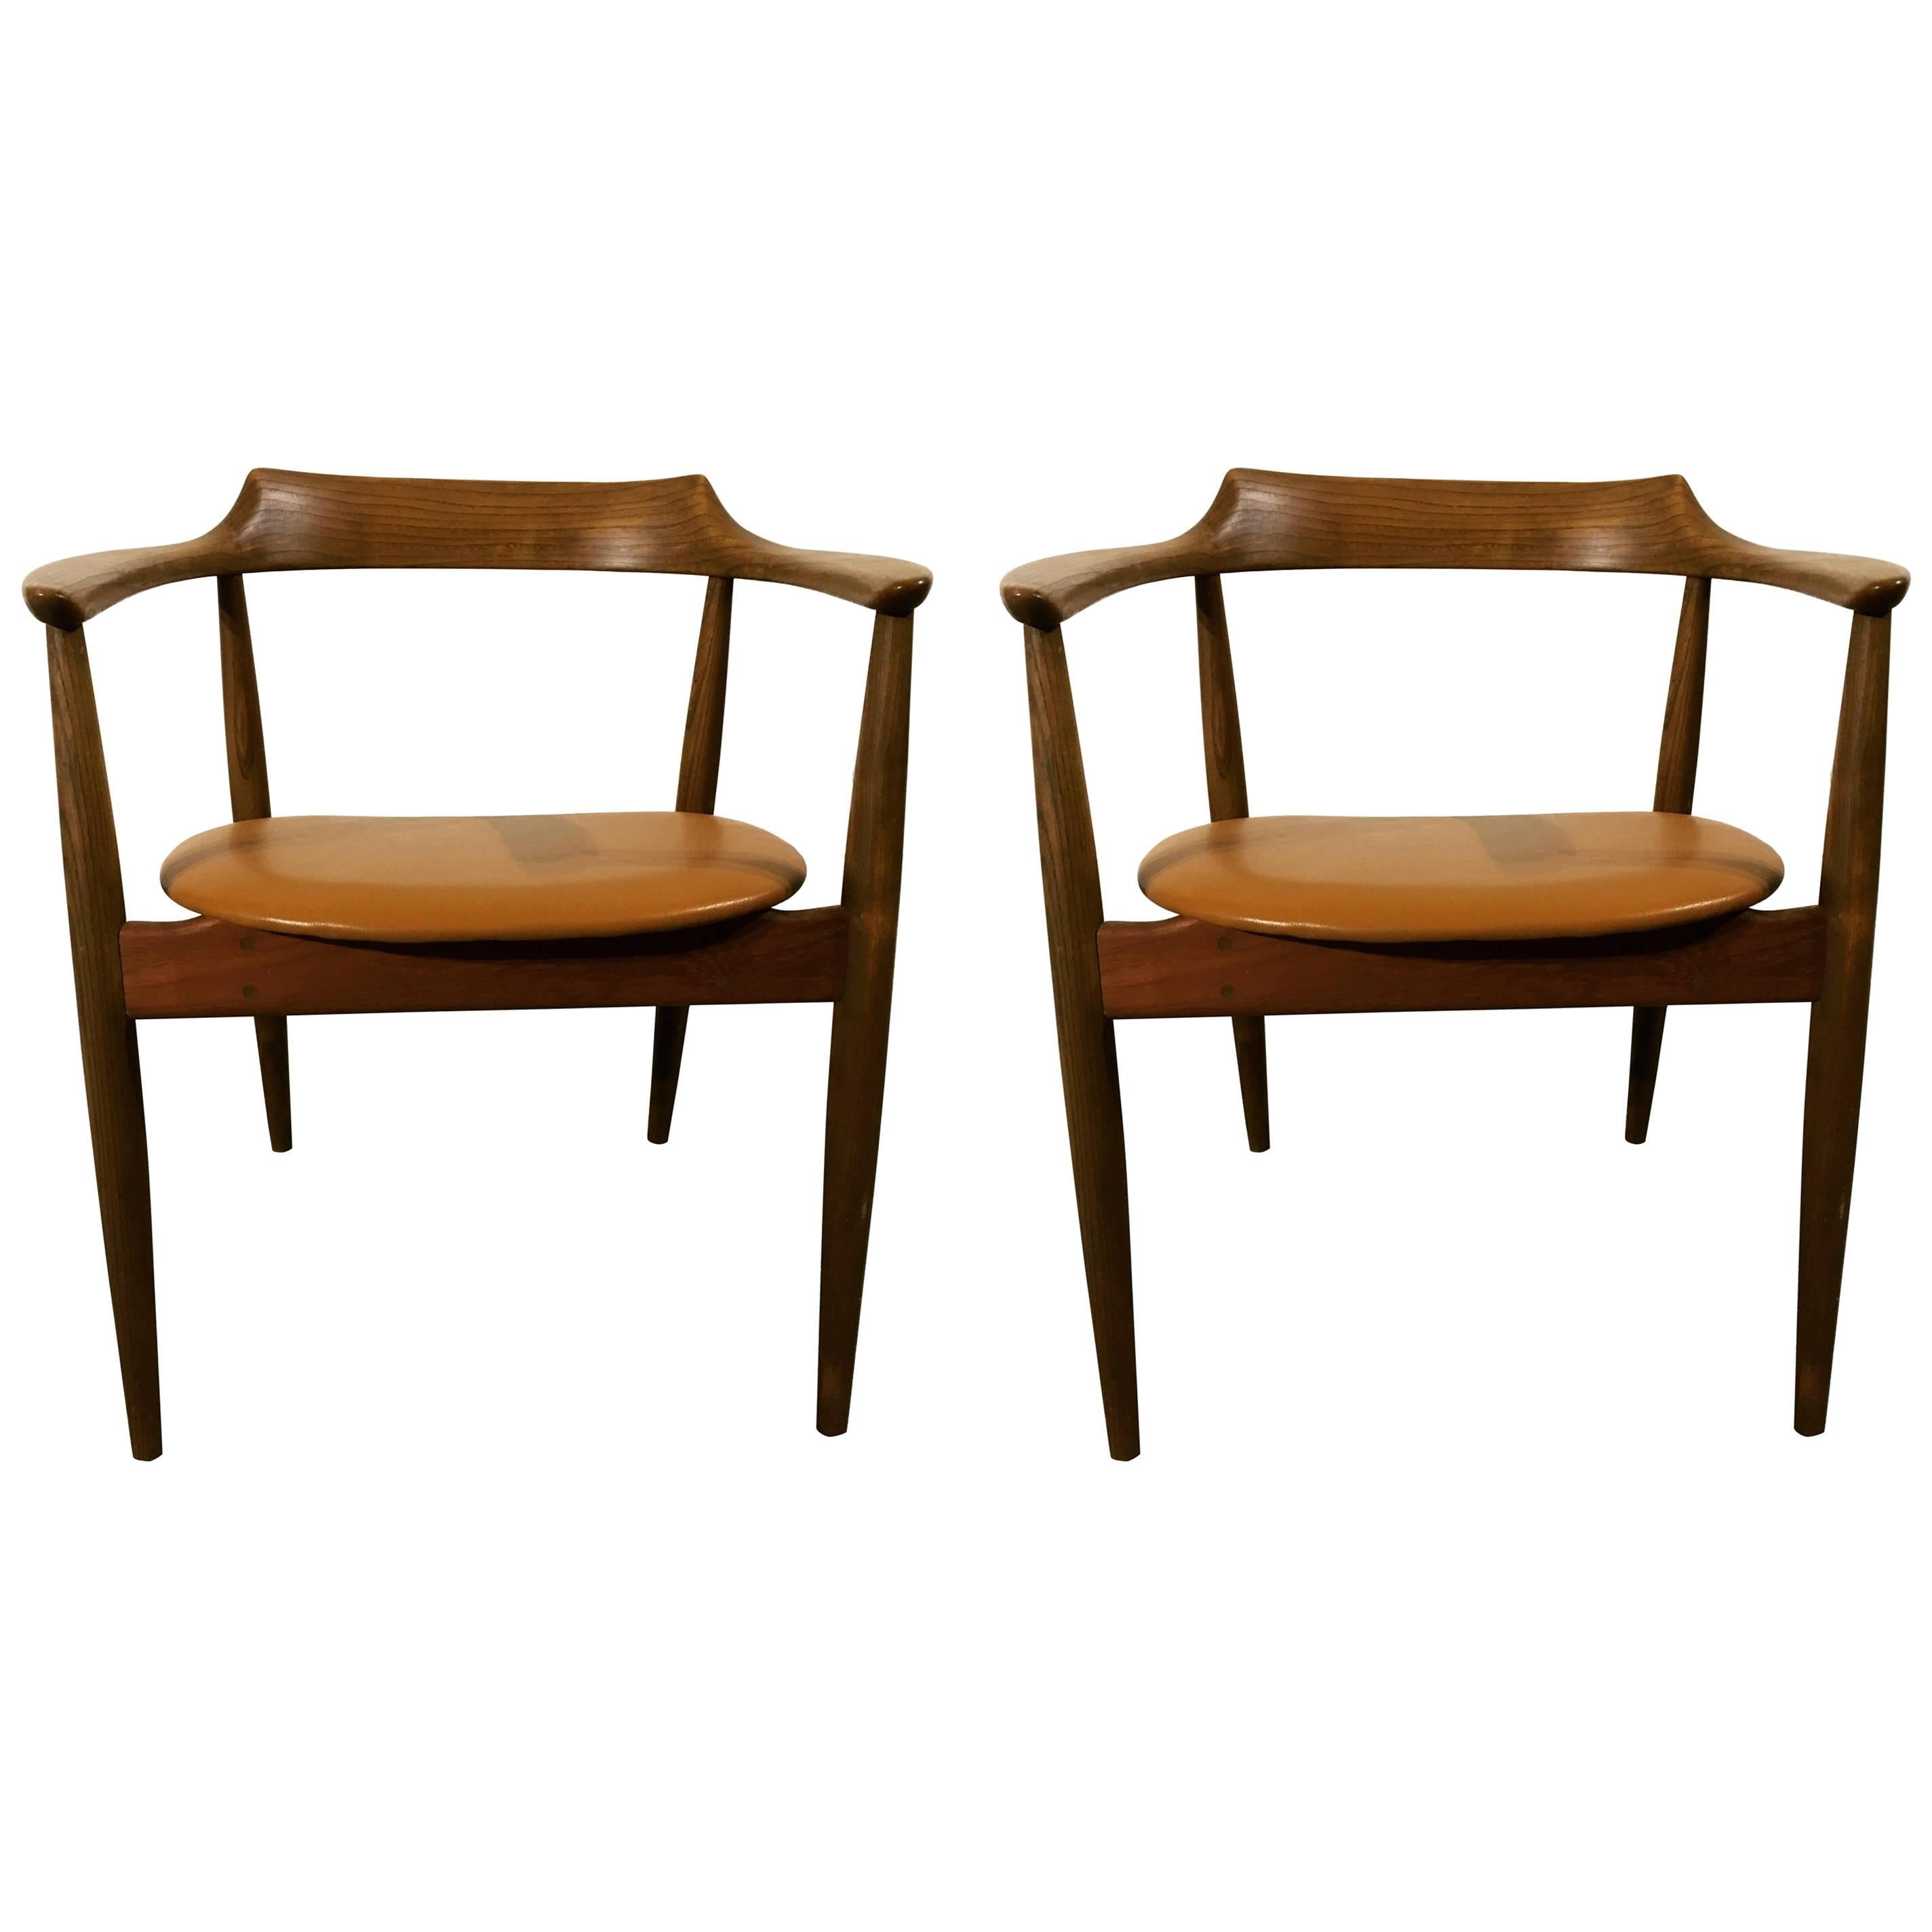 Arne Wahl Armchairs Model ST750 Mid-Century Modern 1960s Elm Wood, Leather For Sale